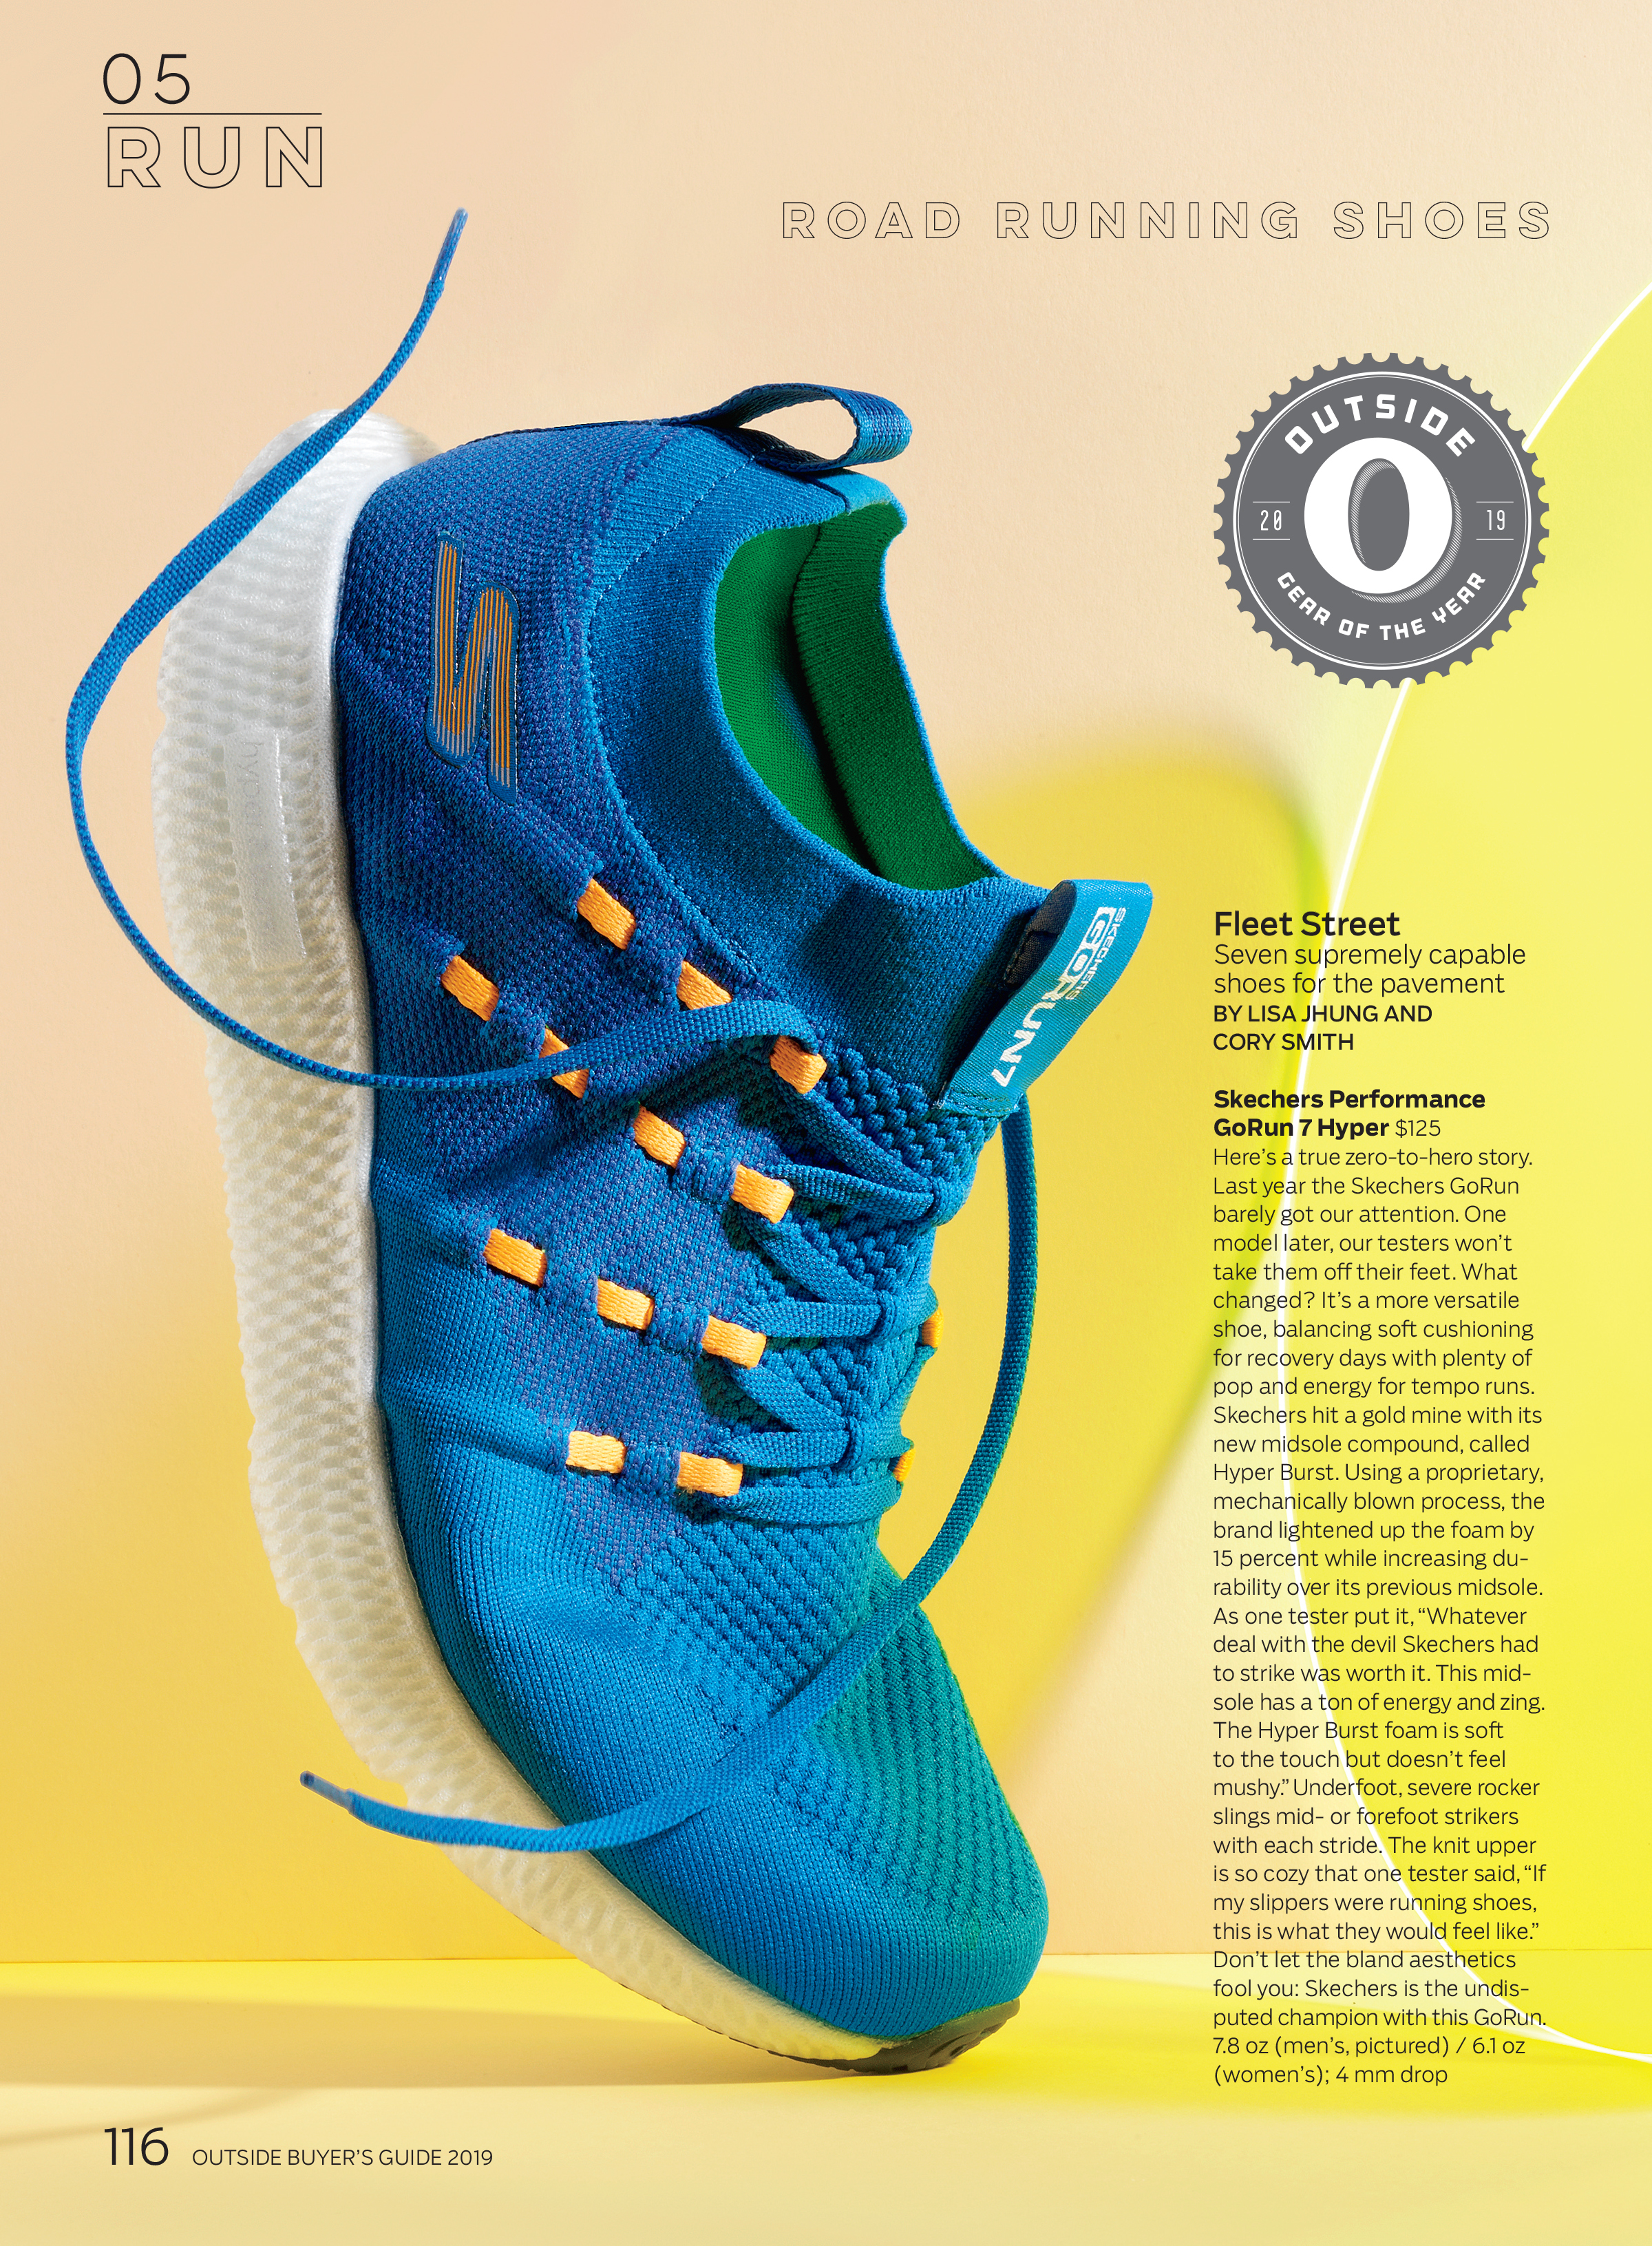 GO RUN 7 Hyper™ Named Gear of the by Outside Magazine | Wire